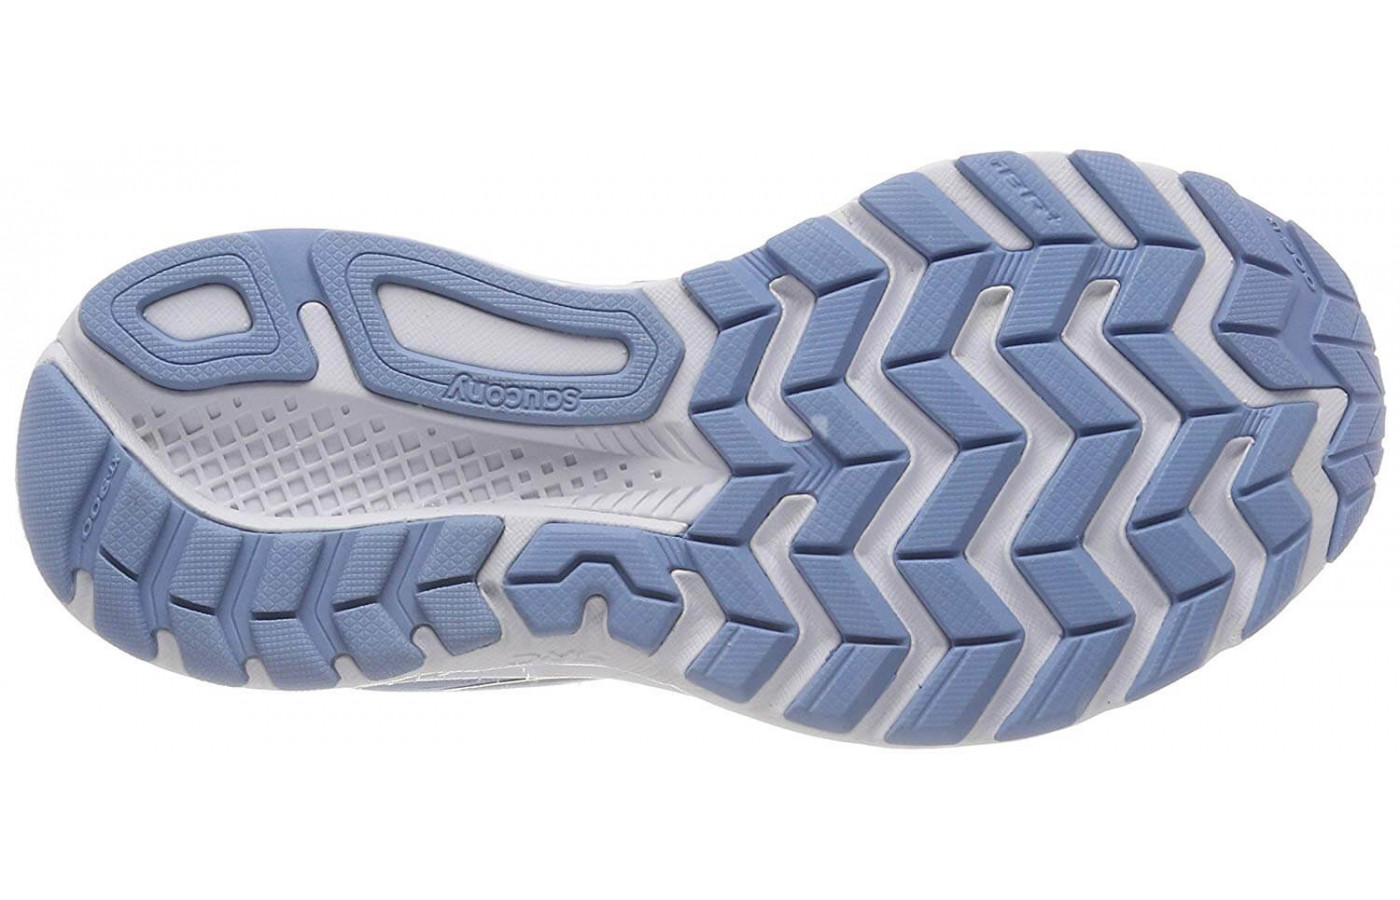 An XT-900 outsole gives the Jazz 20 a deal of traction